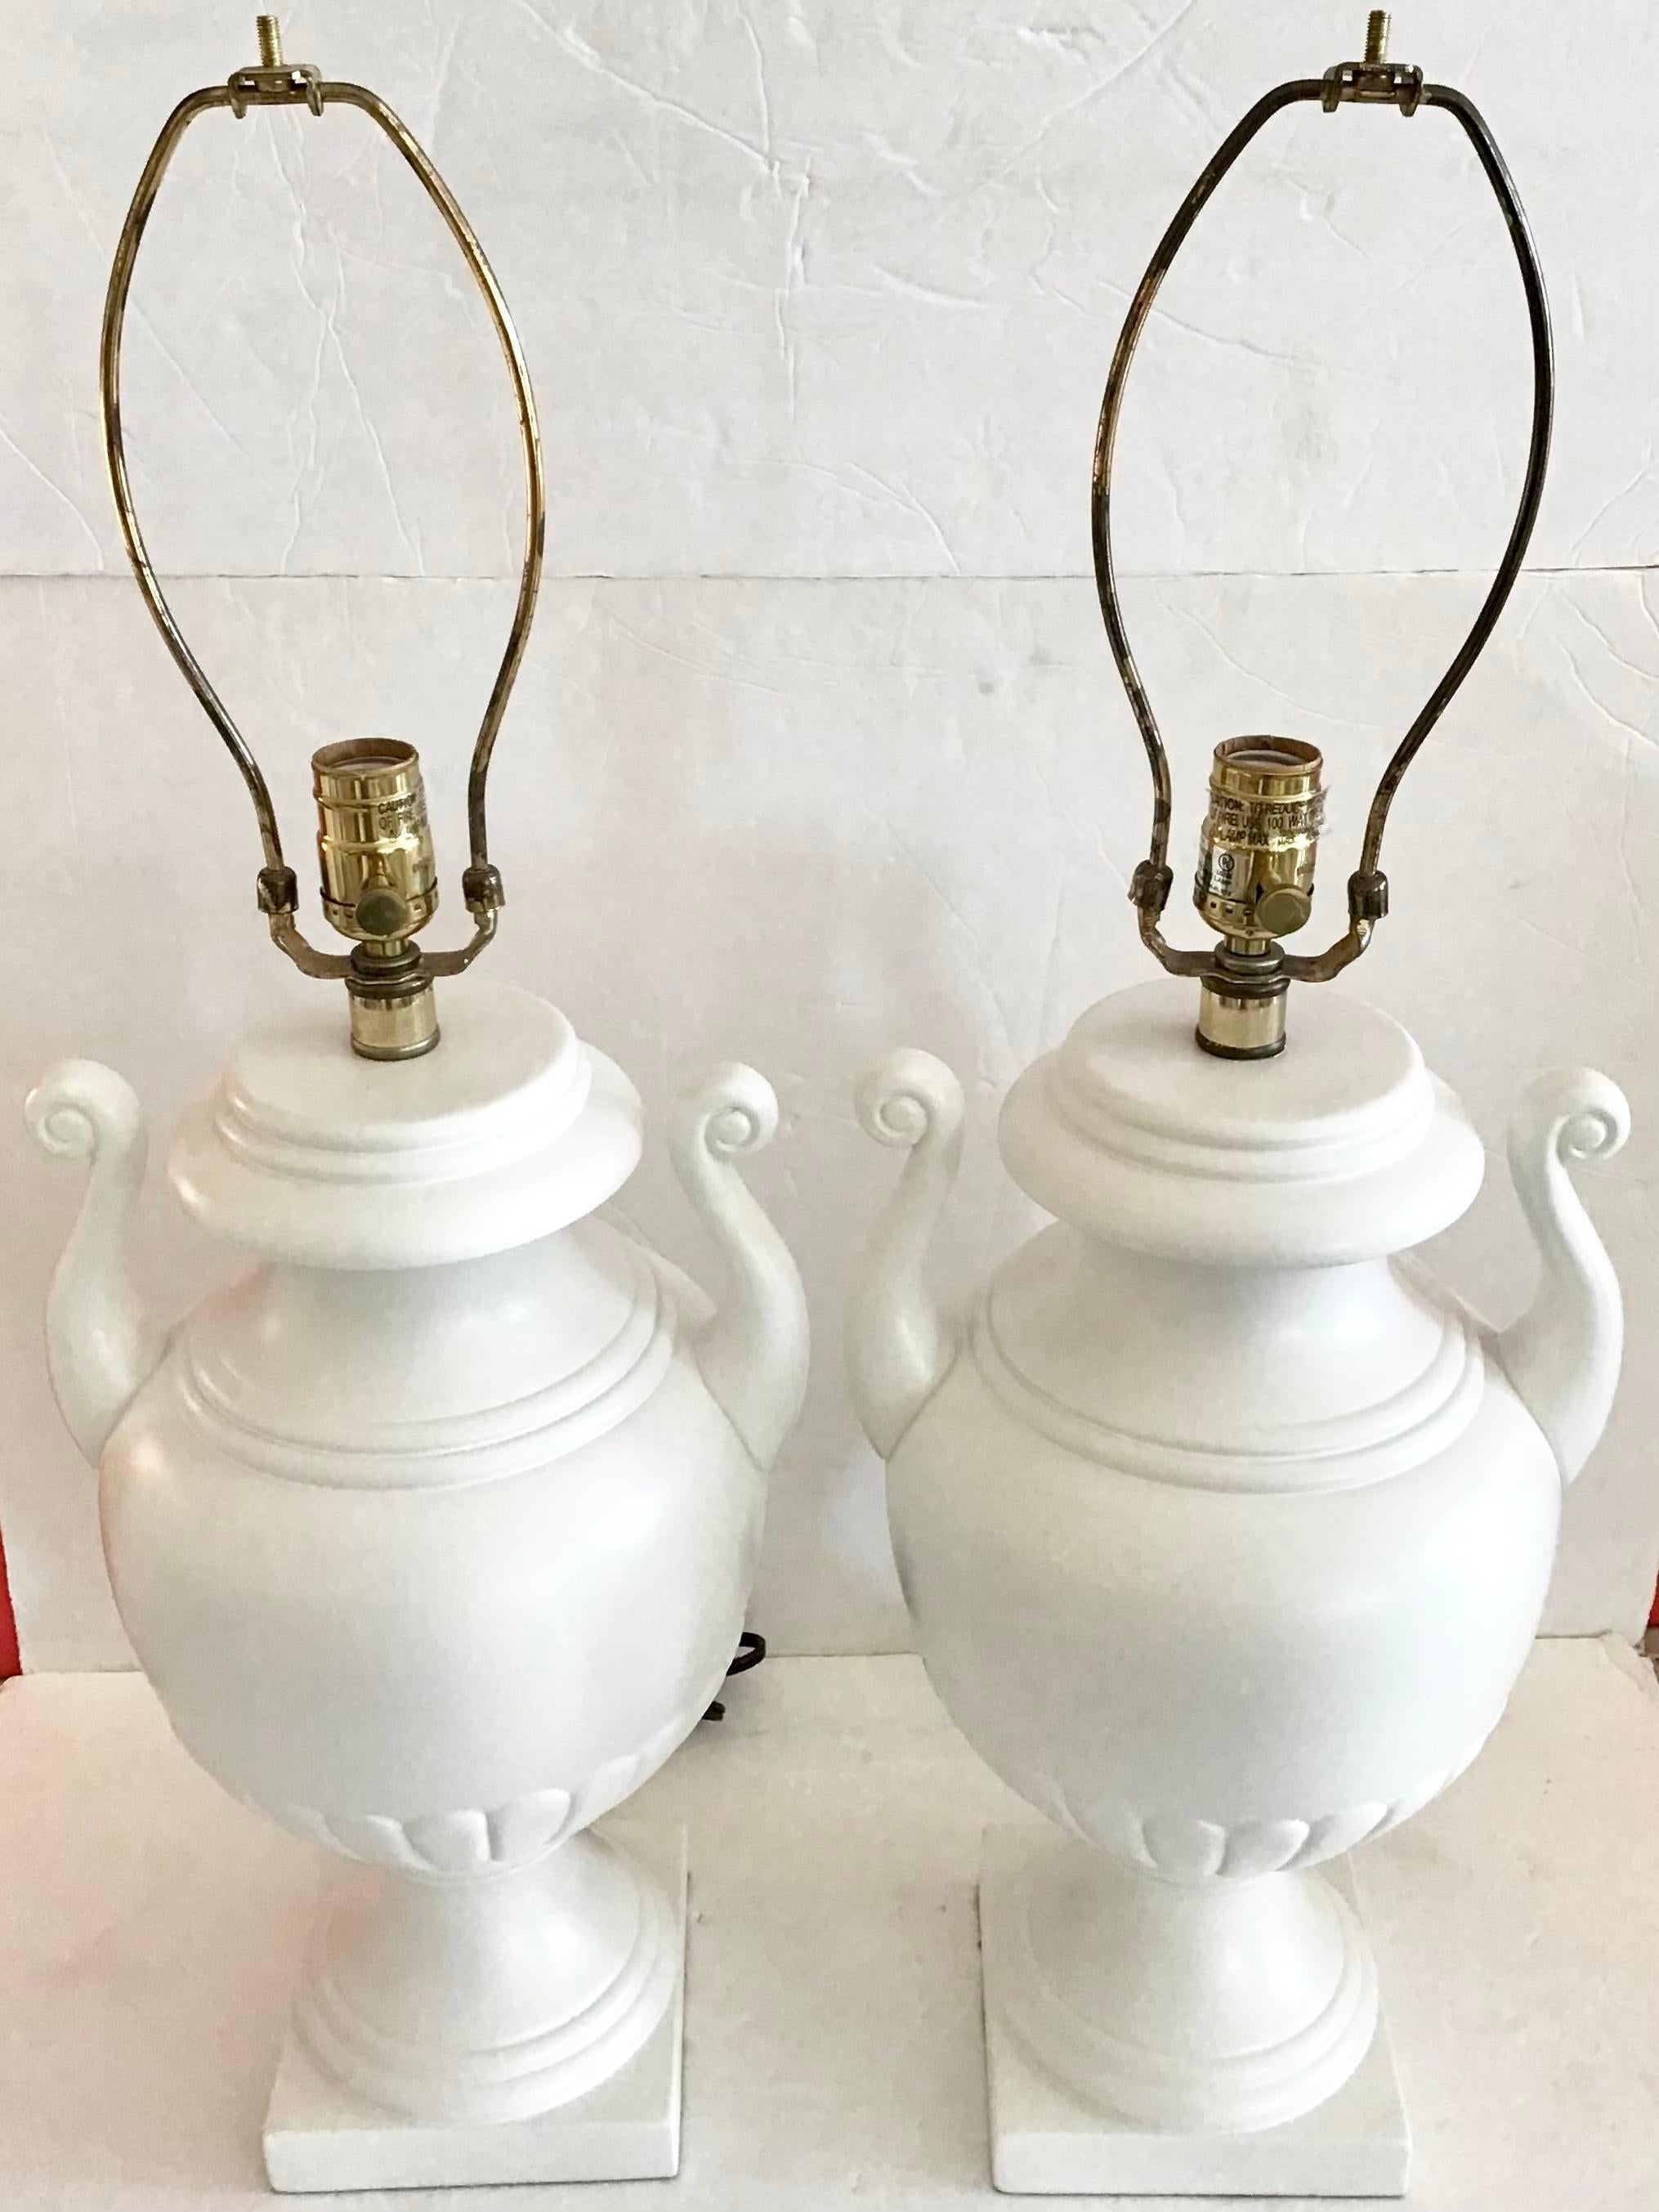 Neoclassical Todd Hase White Urn Table Lamps, a Pair For Sale